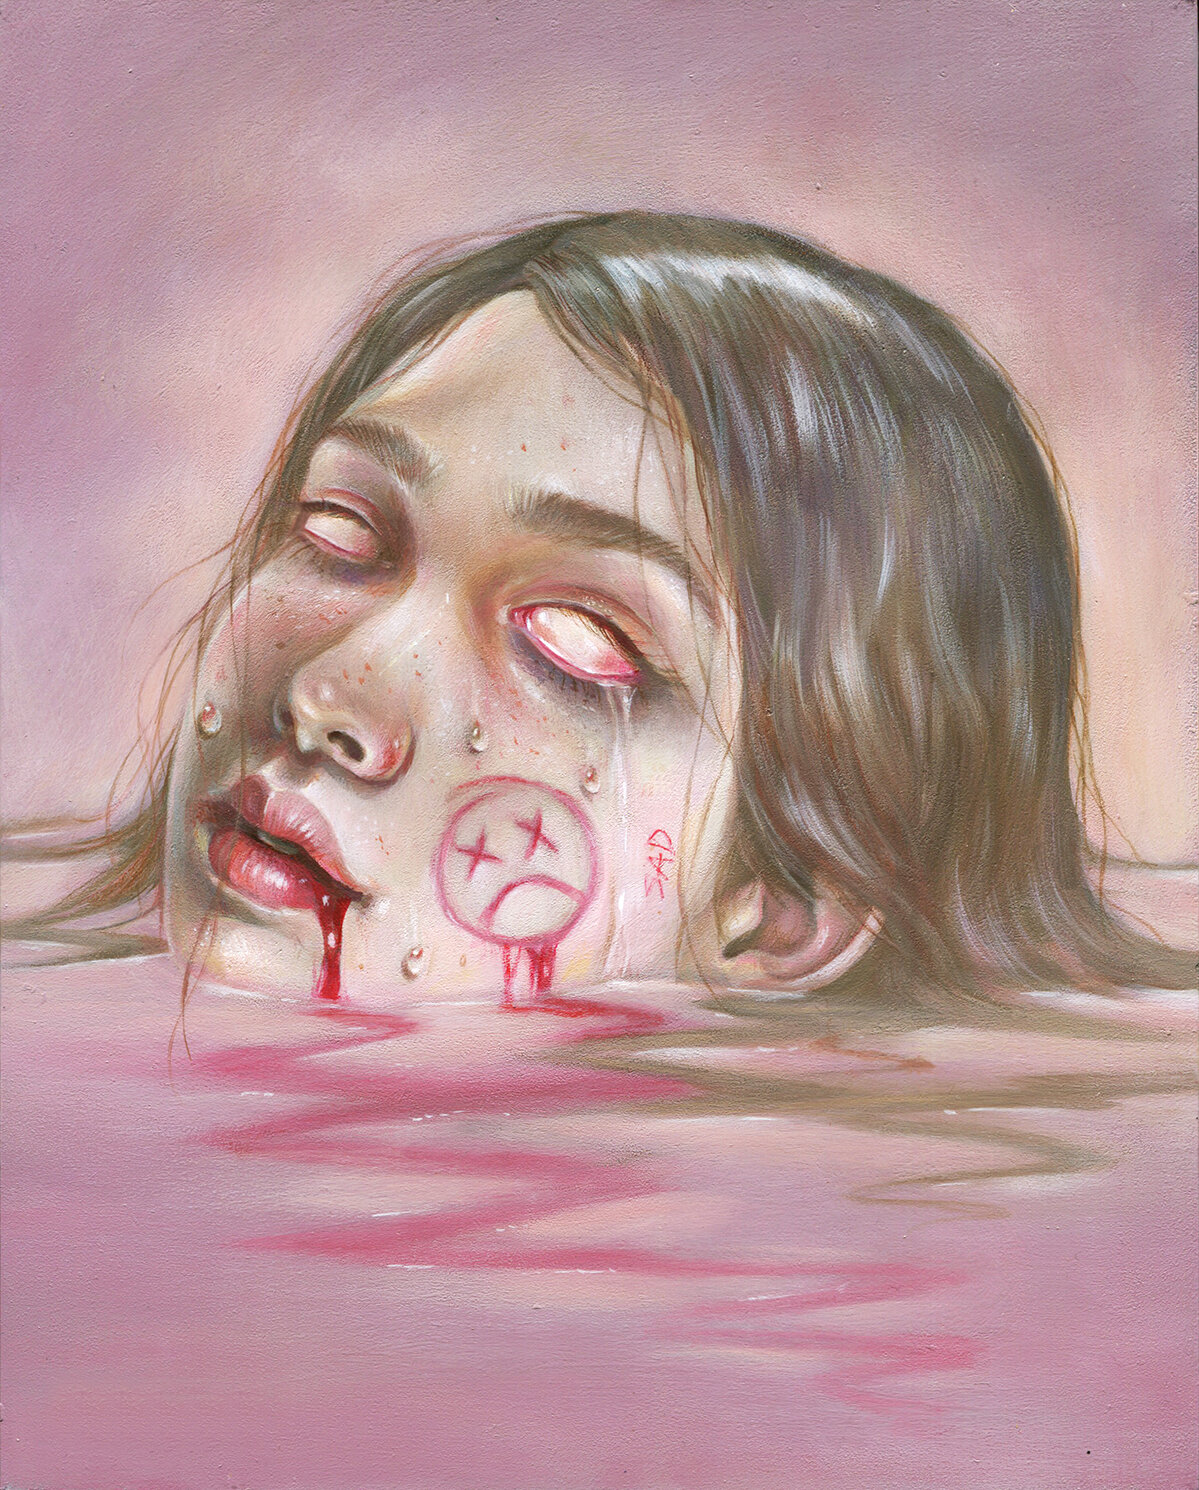 "Drowned"